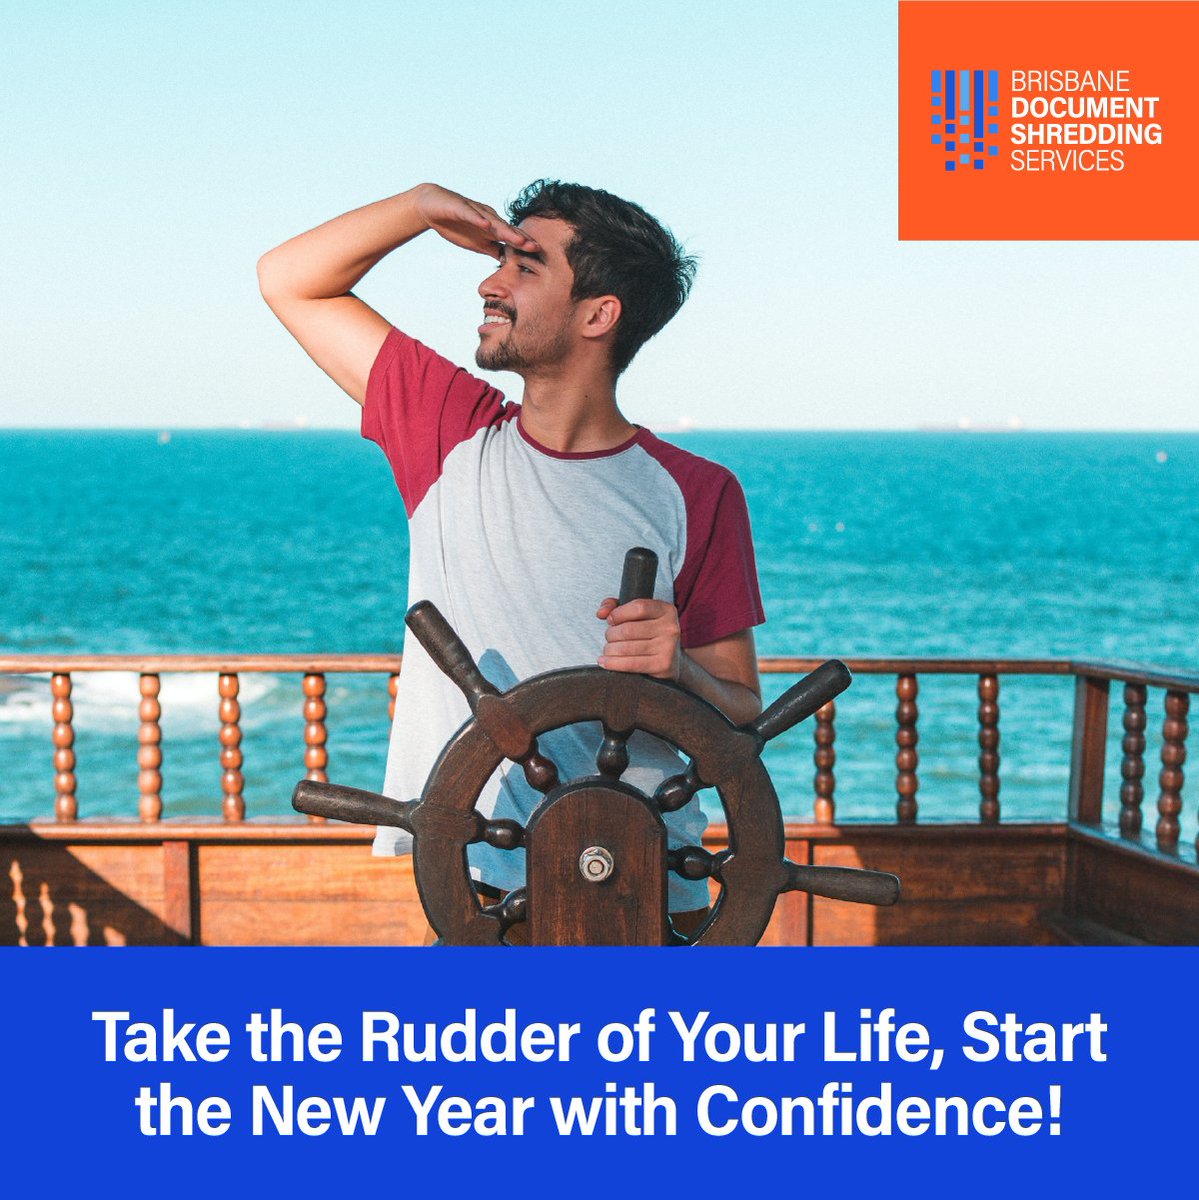 🌟🎉 Brisbane Shred is here to guide you with secure document services. Take control, sail into 2024 confidently. Wishing you a year of success and security! 🚢🔒 #NewYearConfidence #secure2024